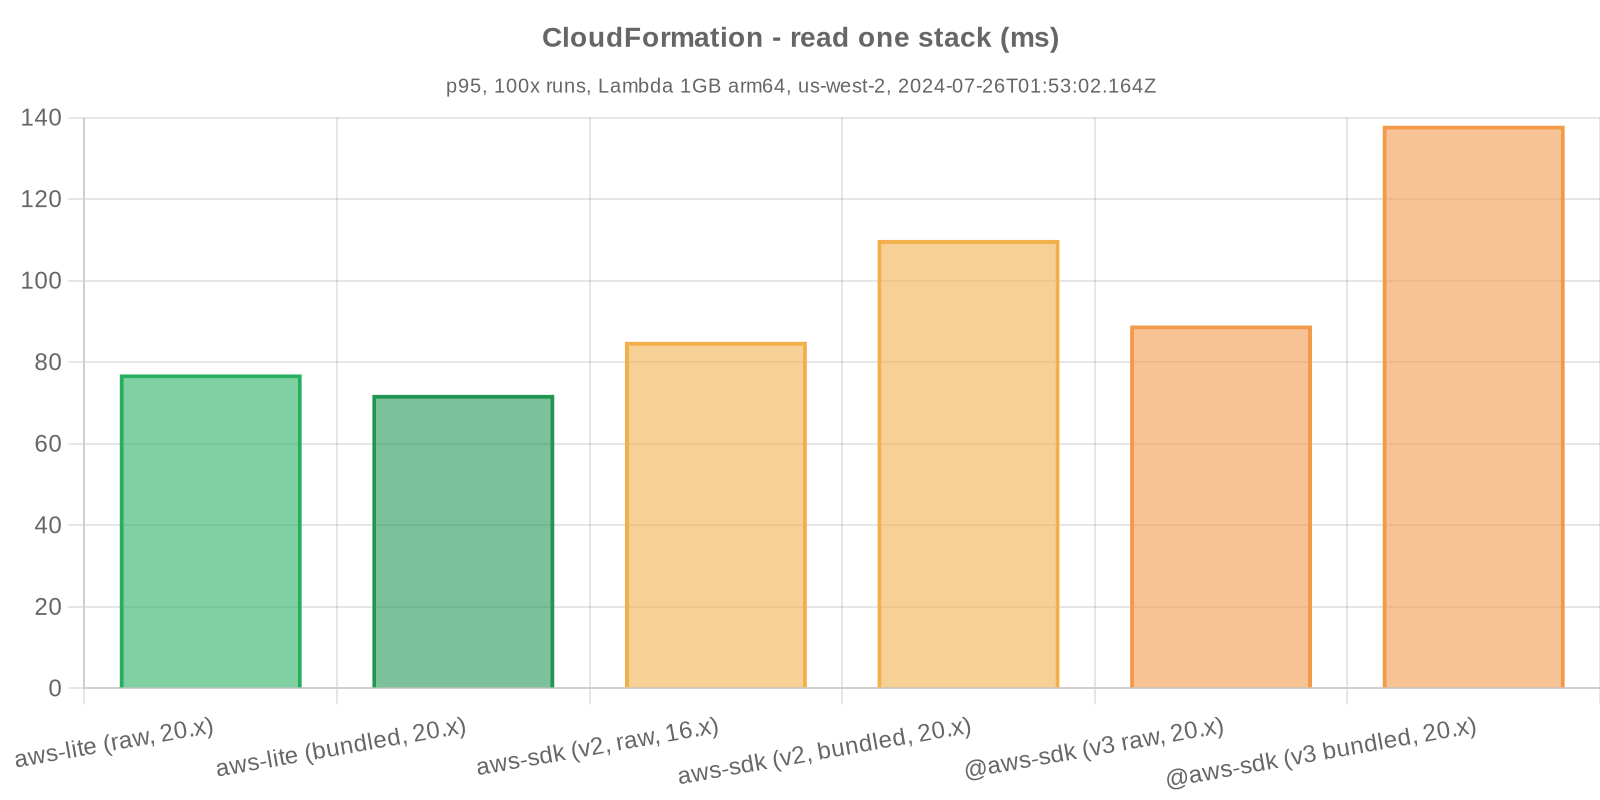 Benchmark statistics - CloudFormation - read one stack